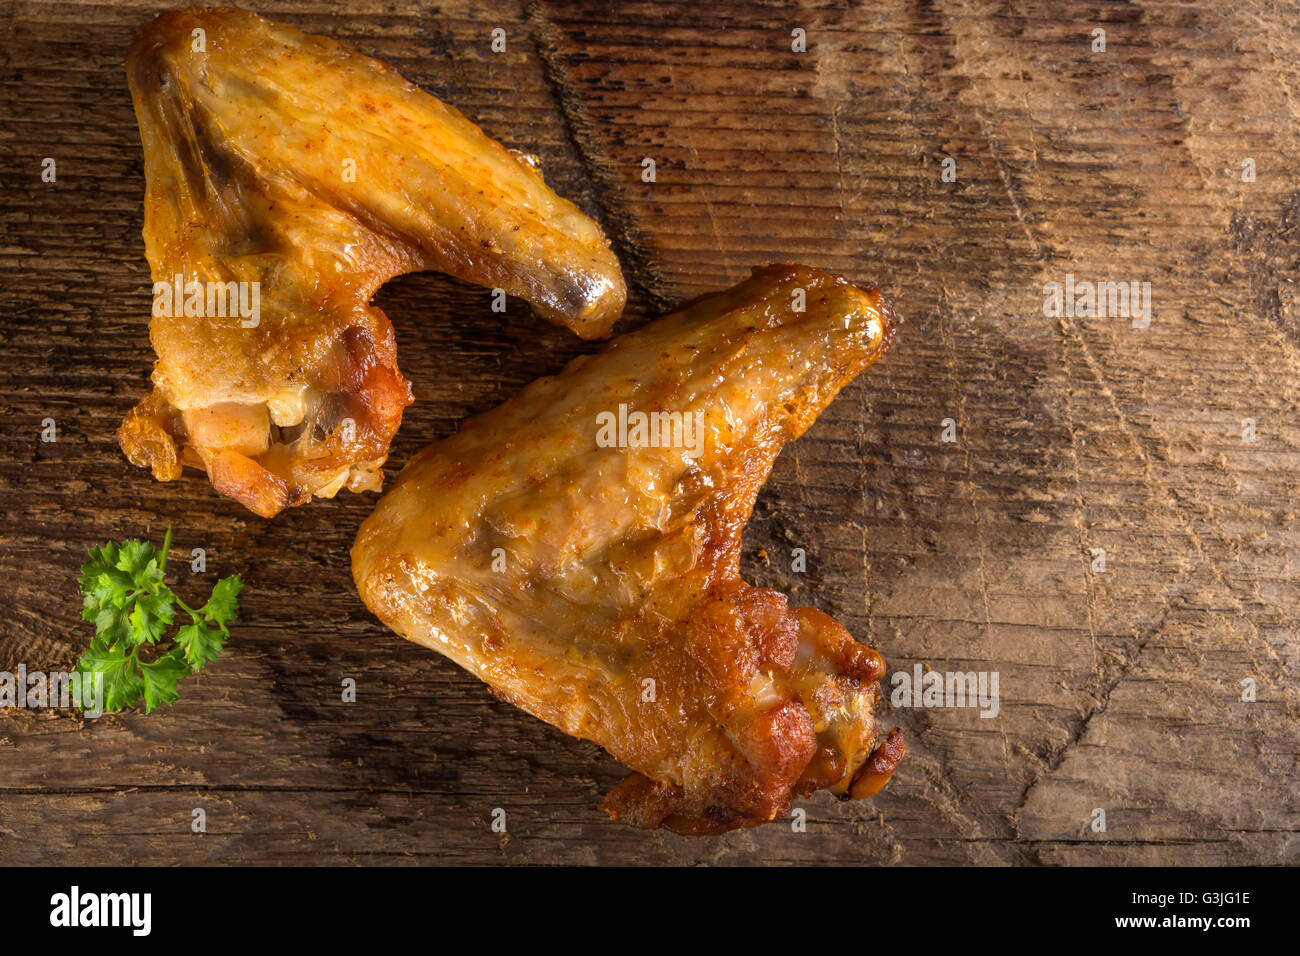 Fried chicken wings on wood board with some fresh parsley Stock Photo